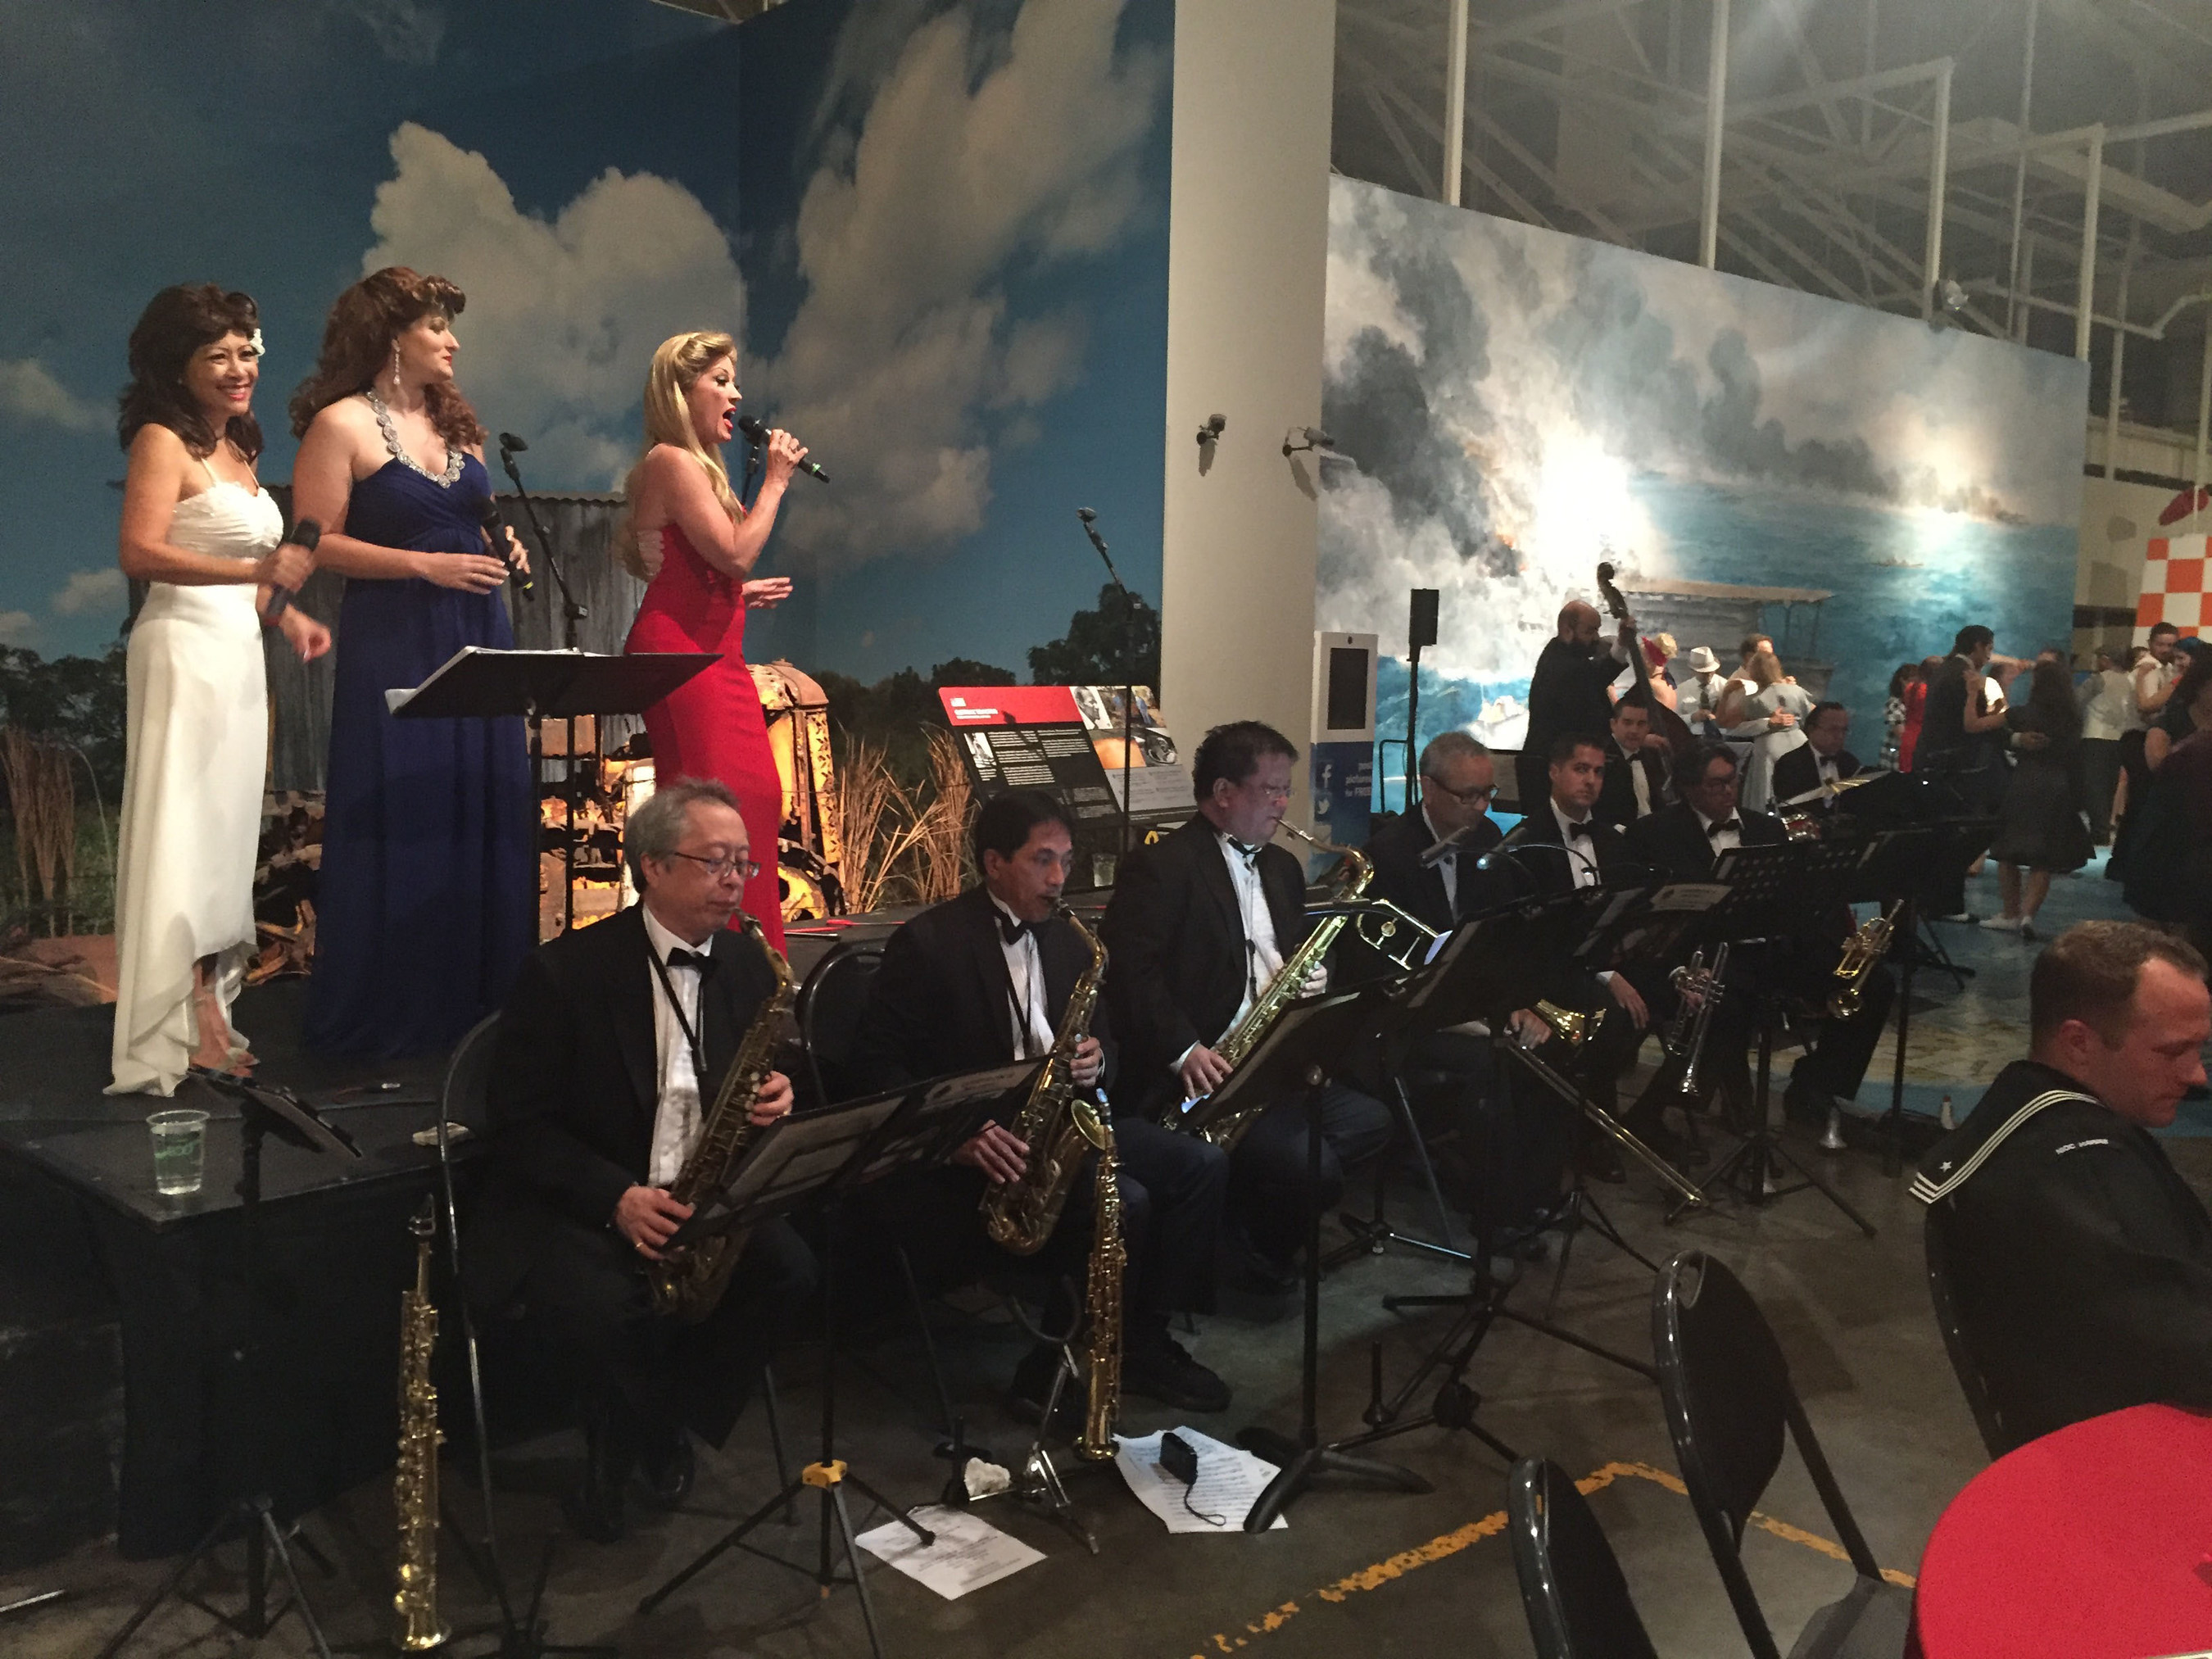 Injured service members and their families enjoy swing music at 1940's themed event.